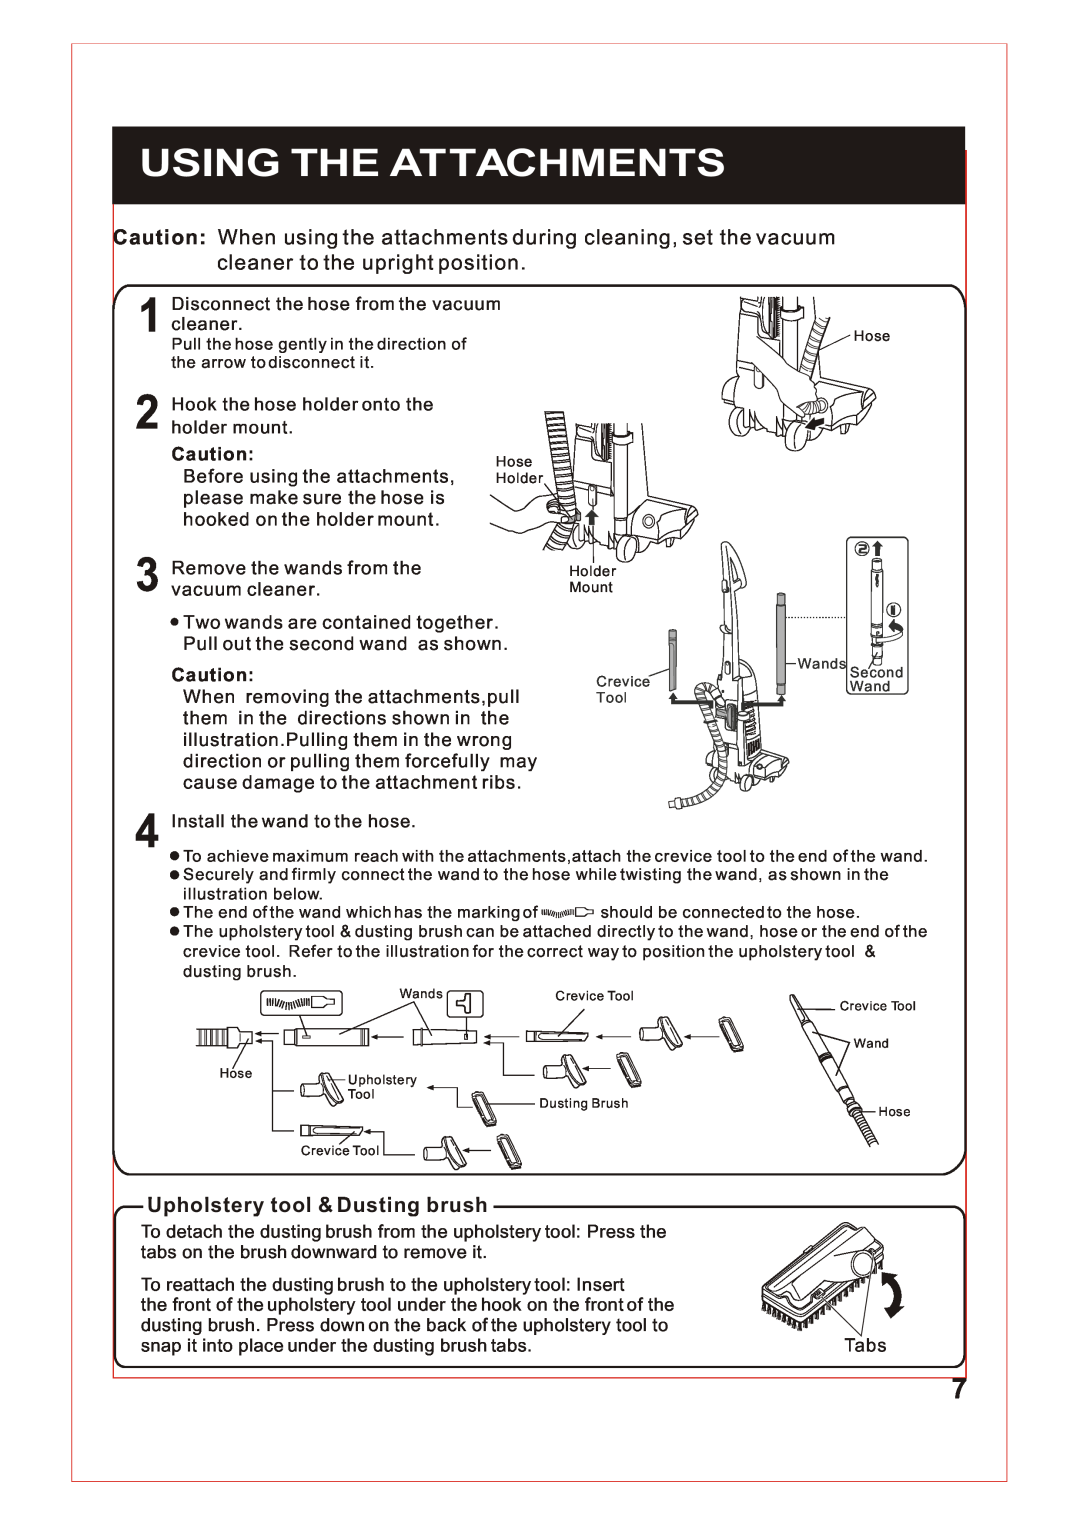 Fantom Vacuum FM740 instruction manual Using The Attachments, Upholstery tool & Dusting brush 